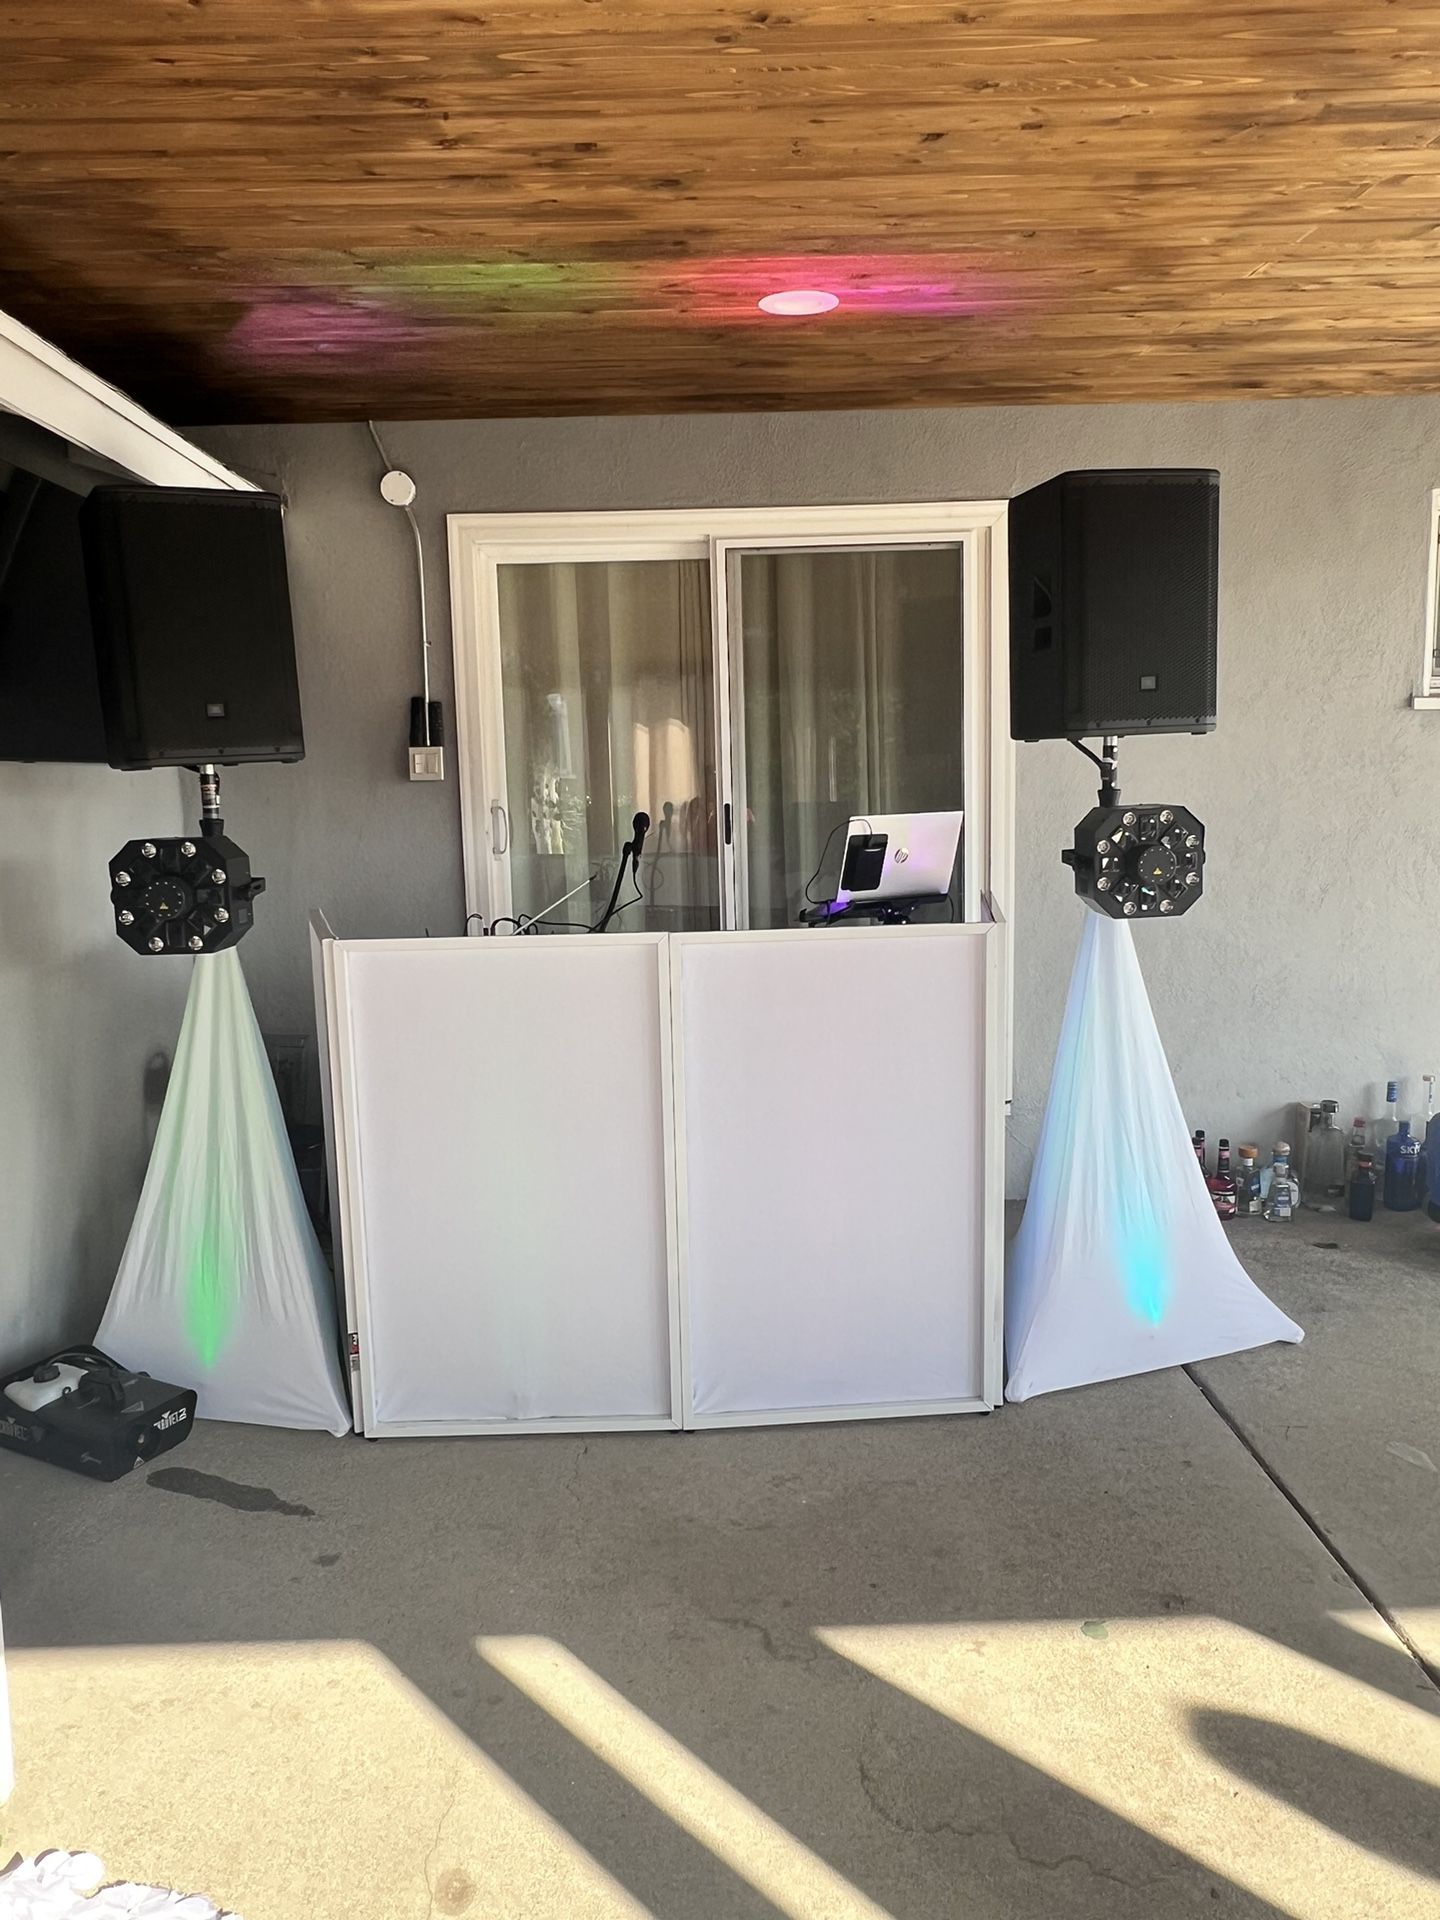 …..DJ…Lights And Speakers… Book Your Event…